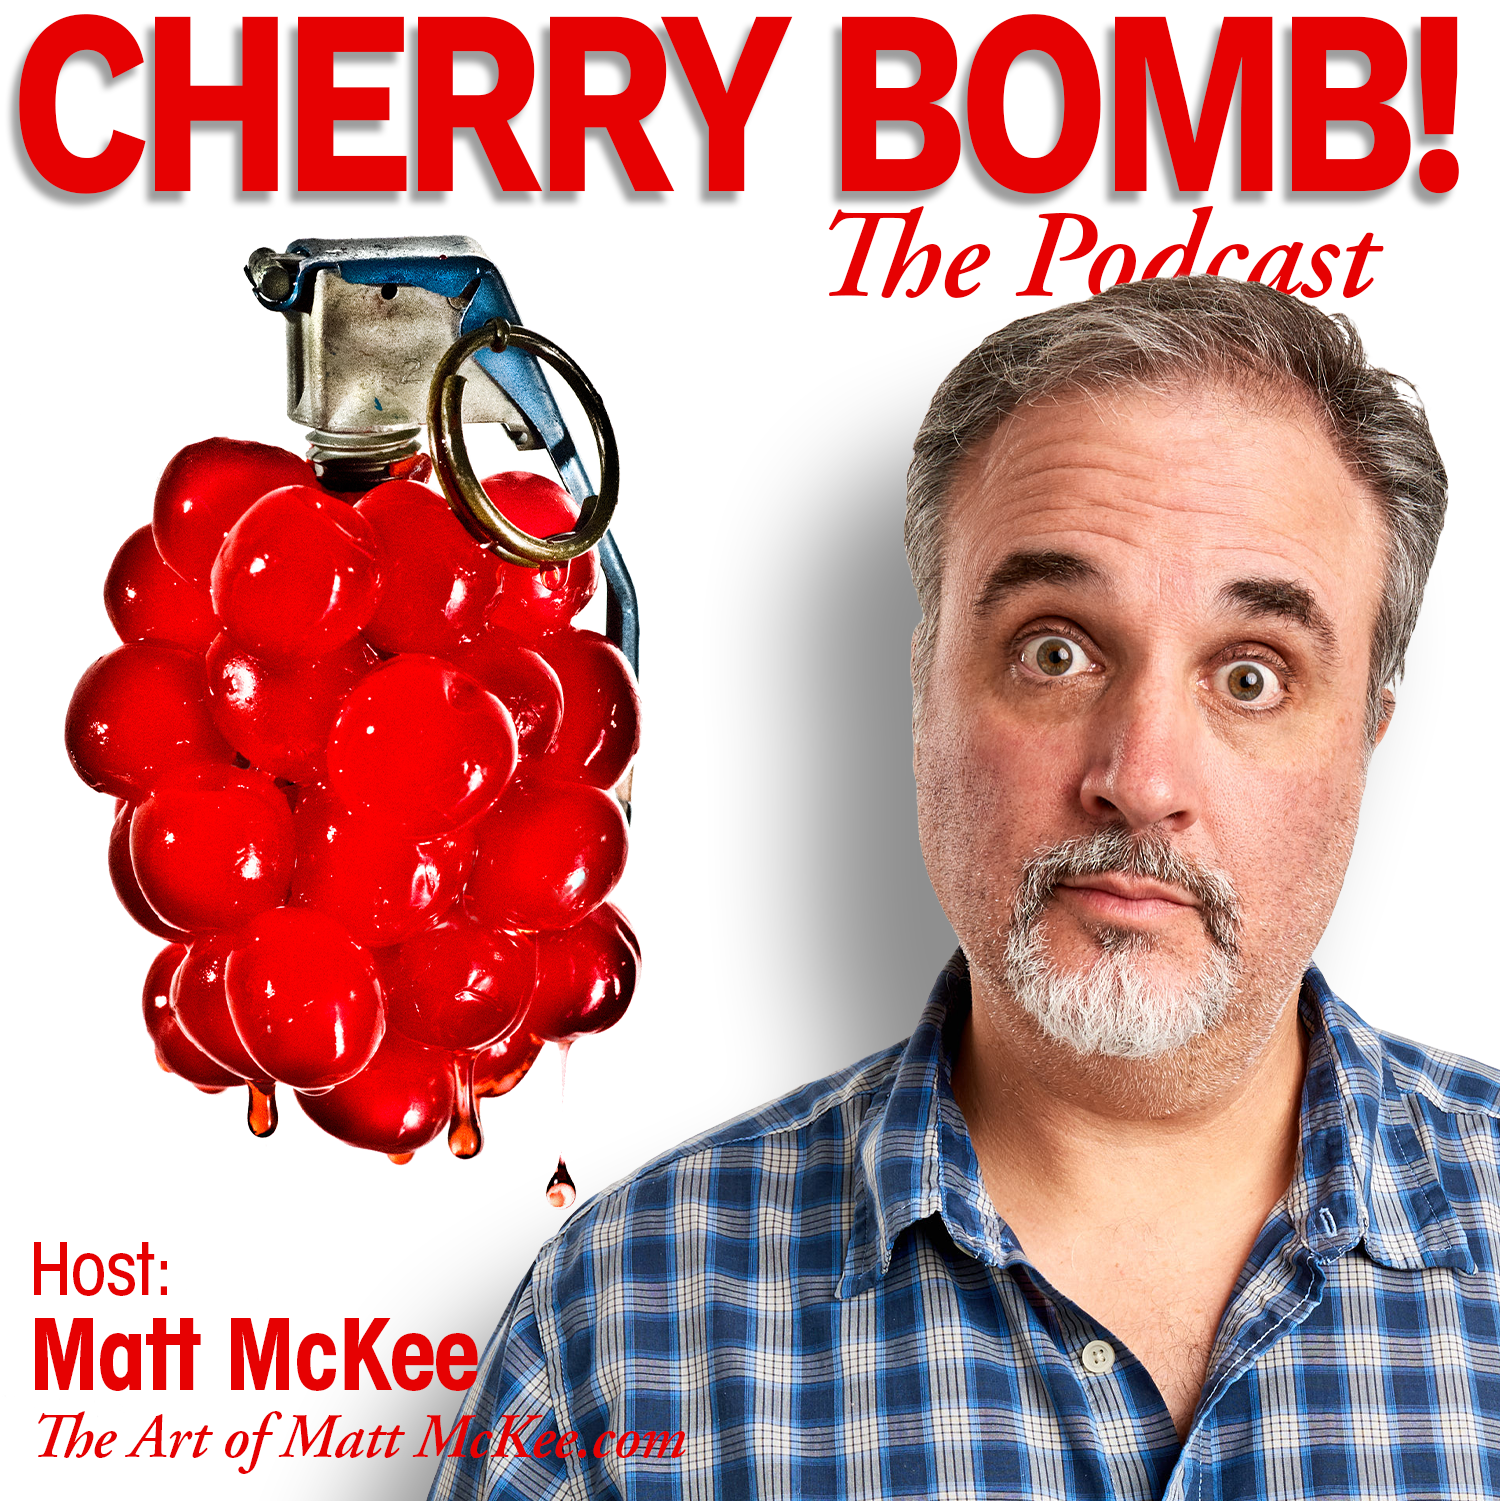 Your humble host of Cherry Bomb! The Podcast